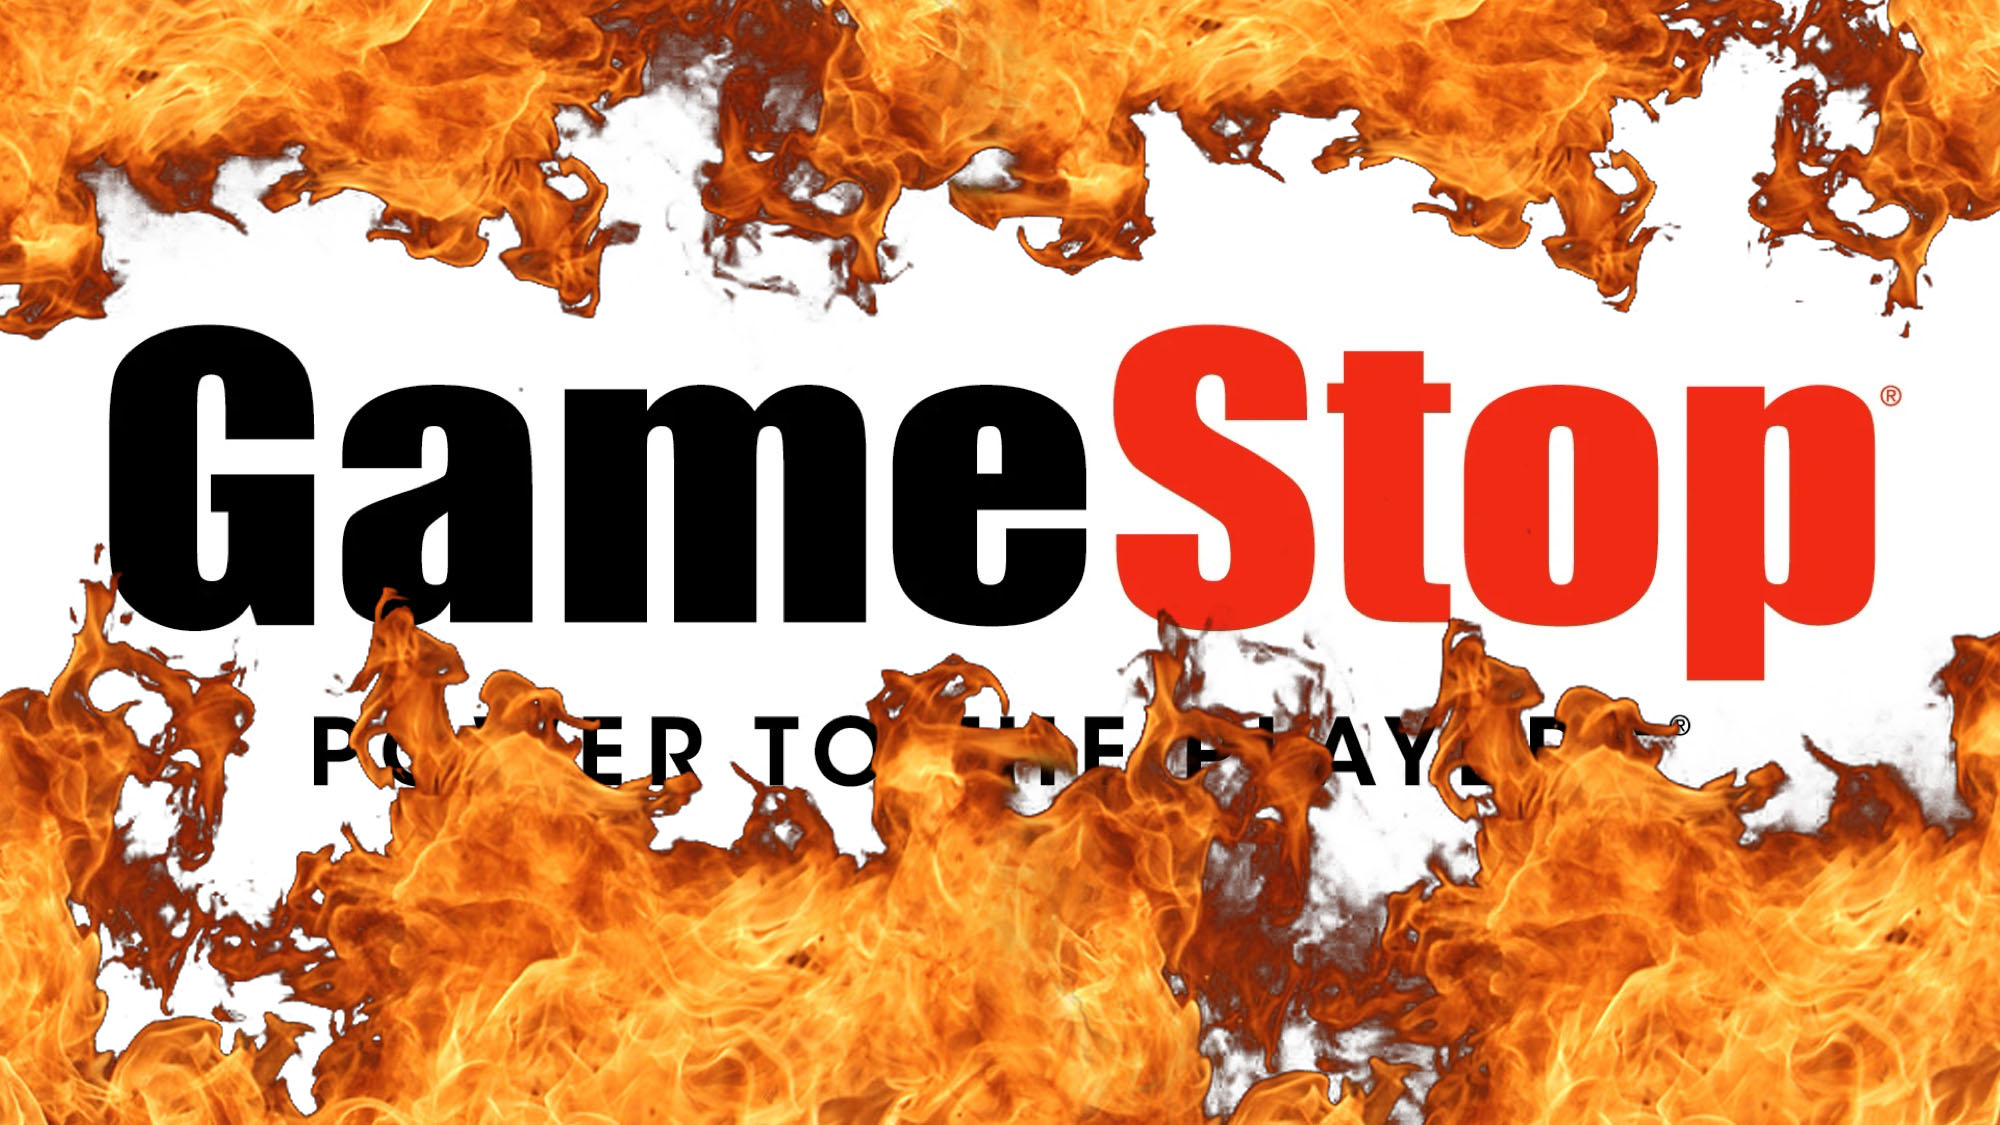 Industry Giant GameStop Closing Hundreds Of Stores In The Next Year, Revamping Others